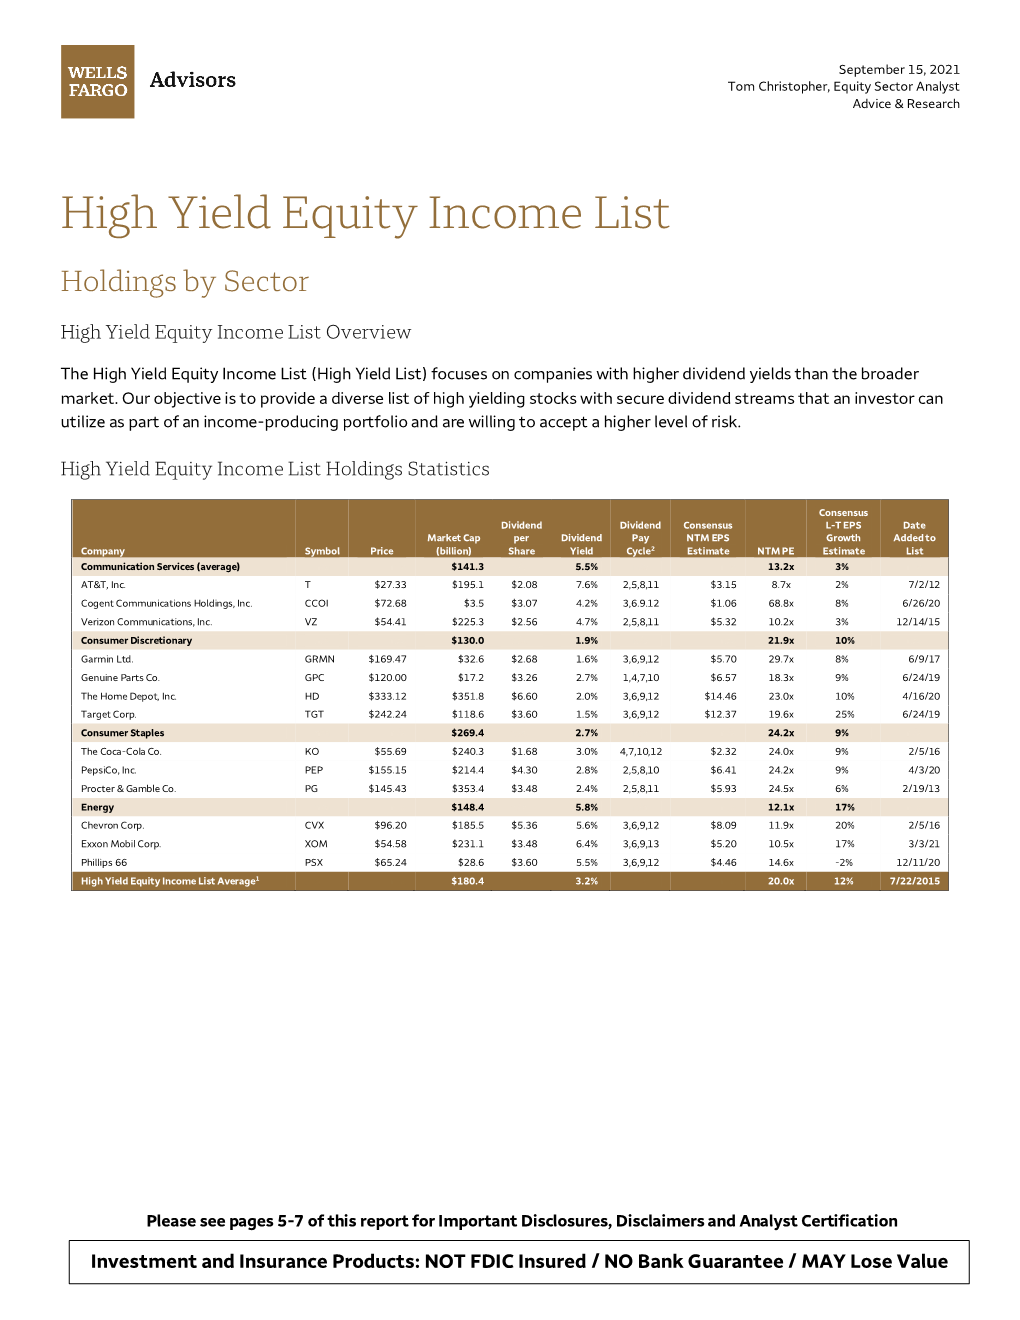 High Yield Equity Income List by Sector